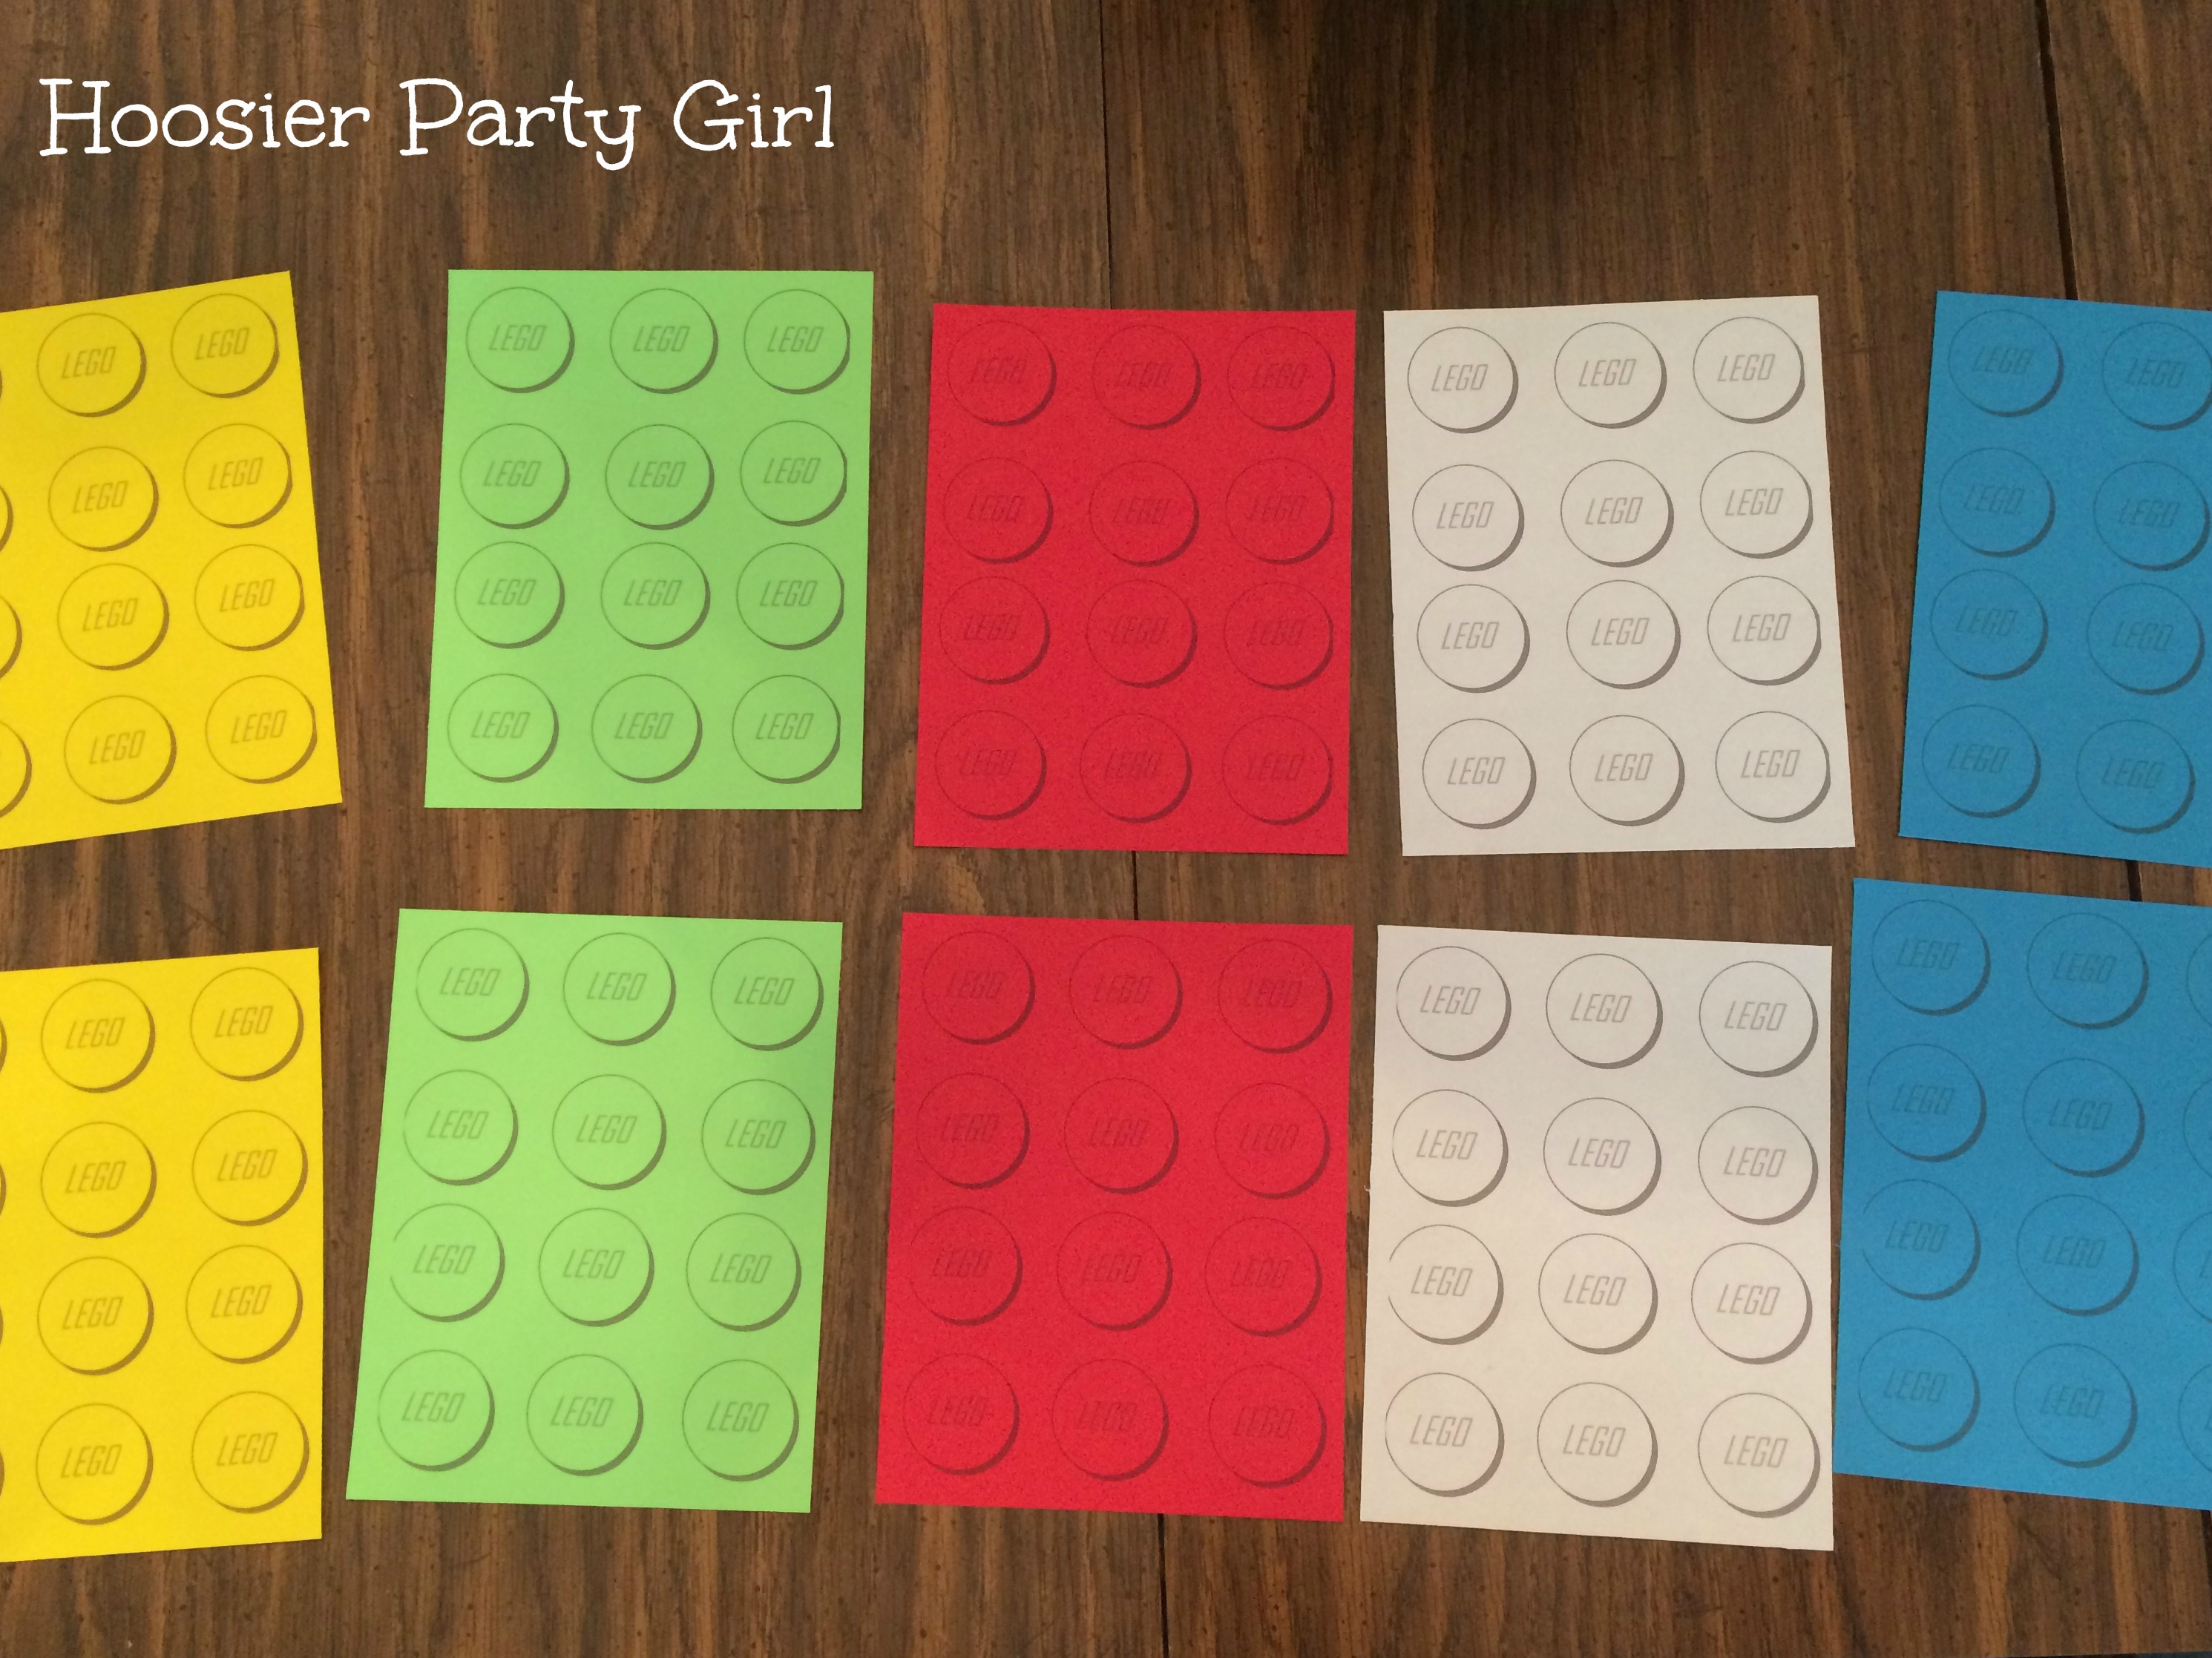 8-best-images-of-lego-block-printable-lego-free-printable-box-templates-lego-party-printables